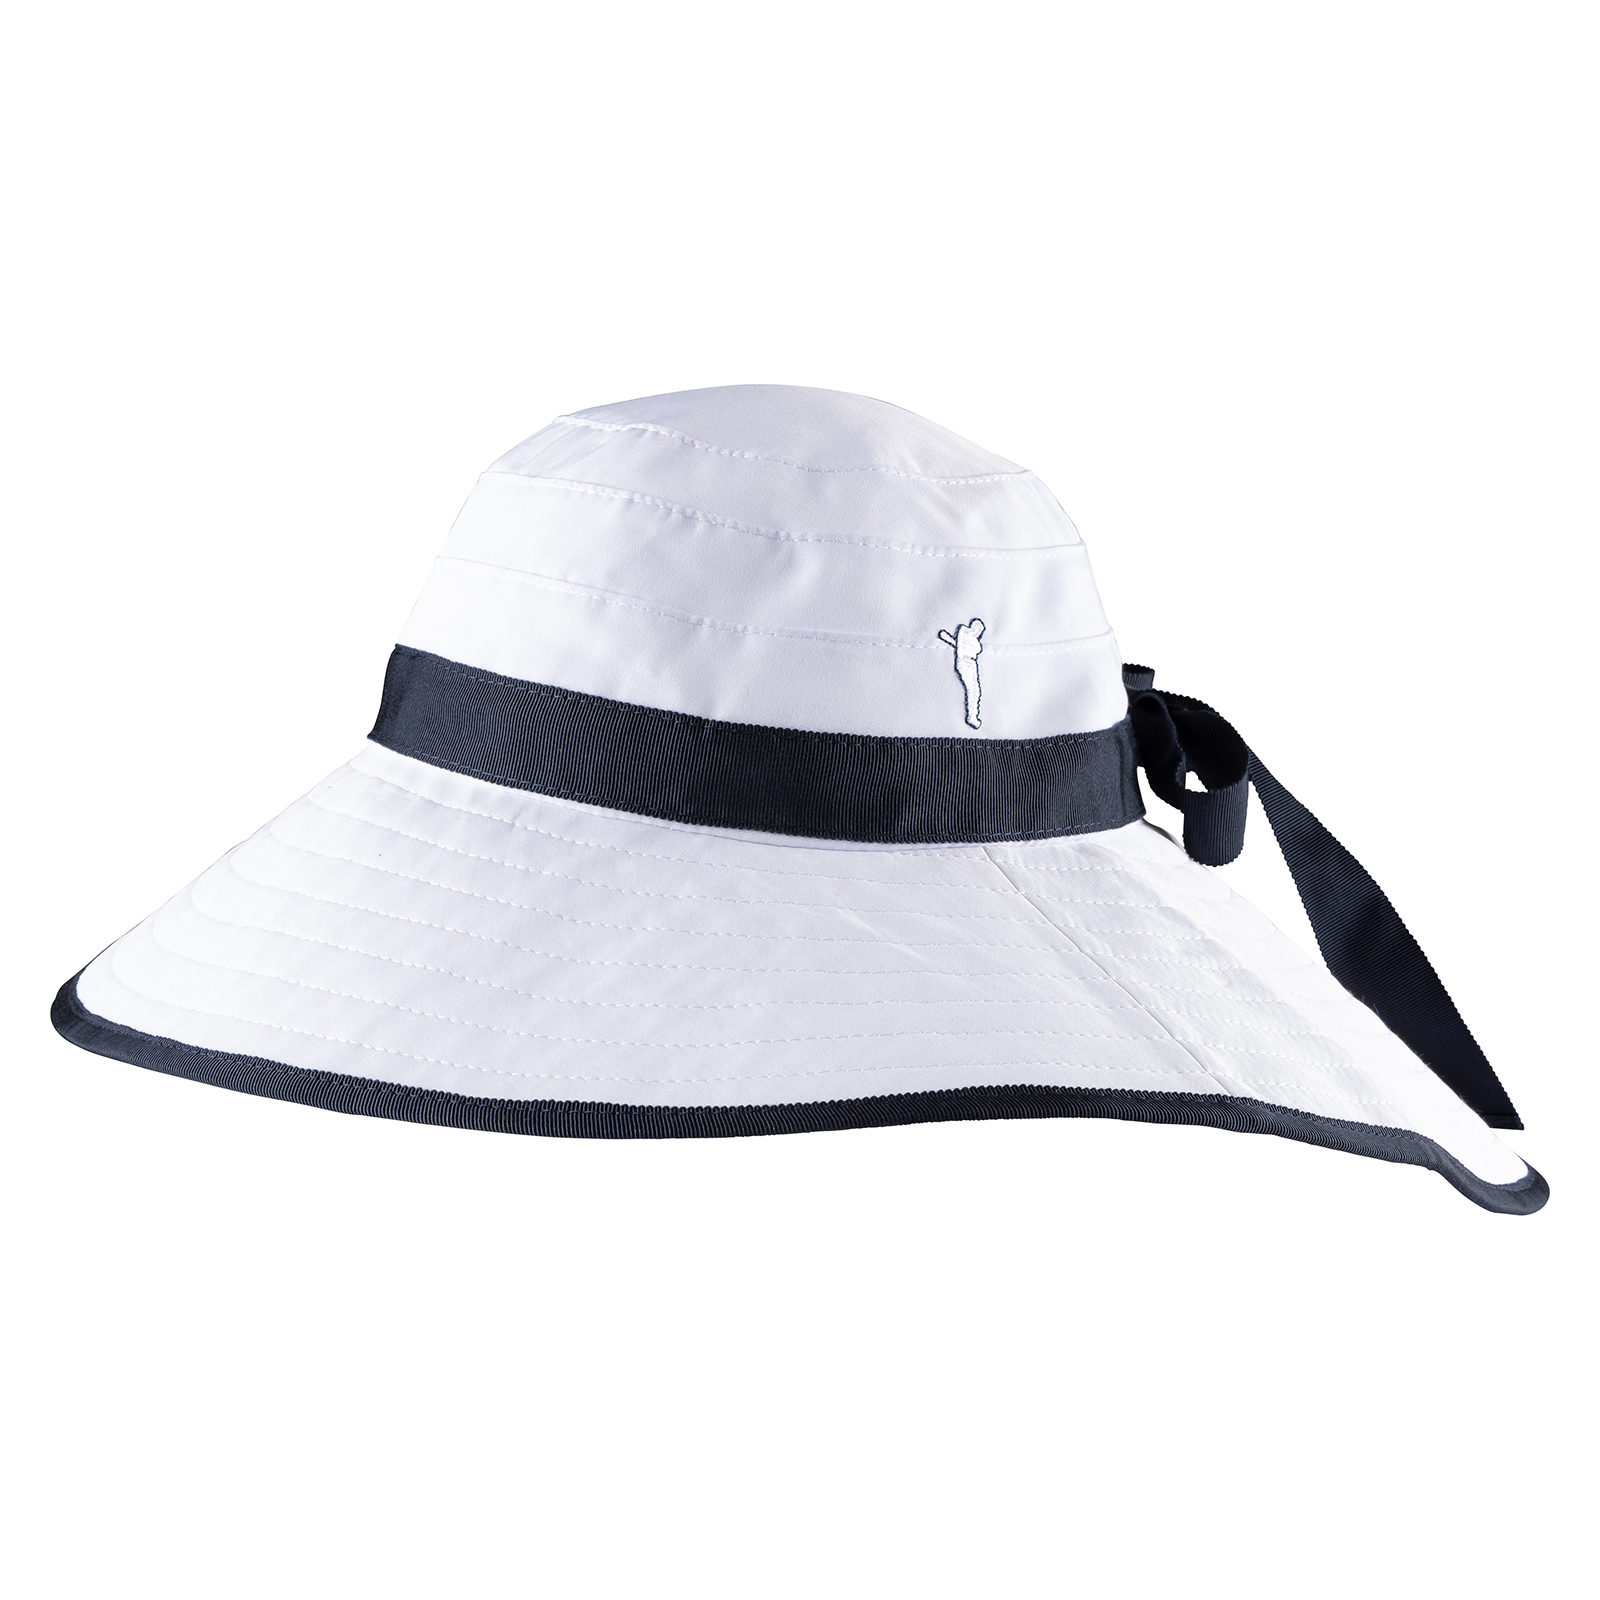 Ladies lightweight hat with concealed ponytail hole